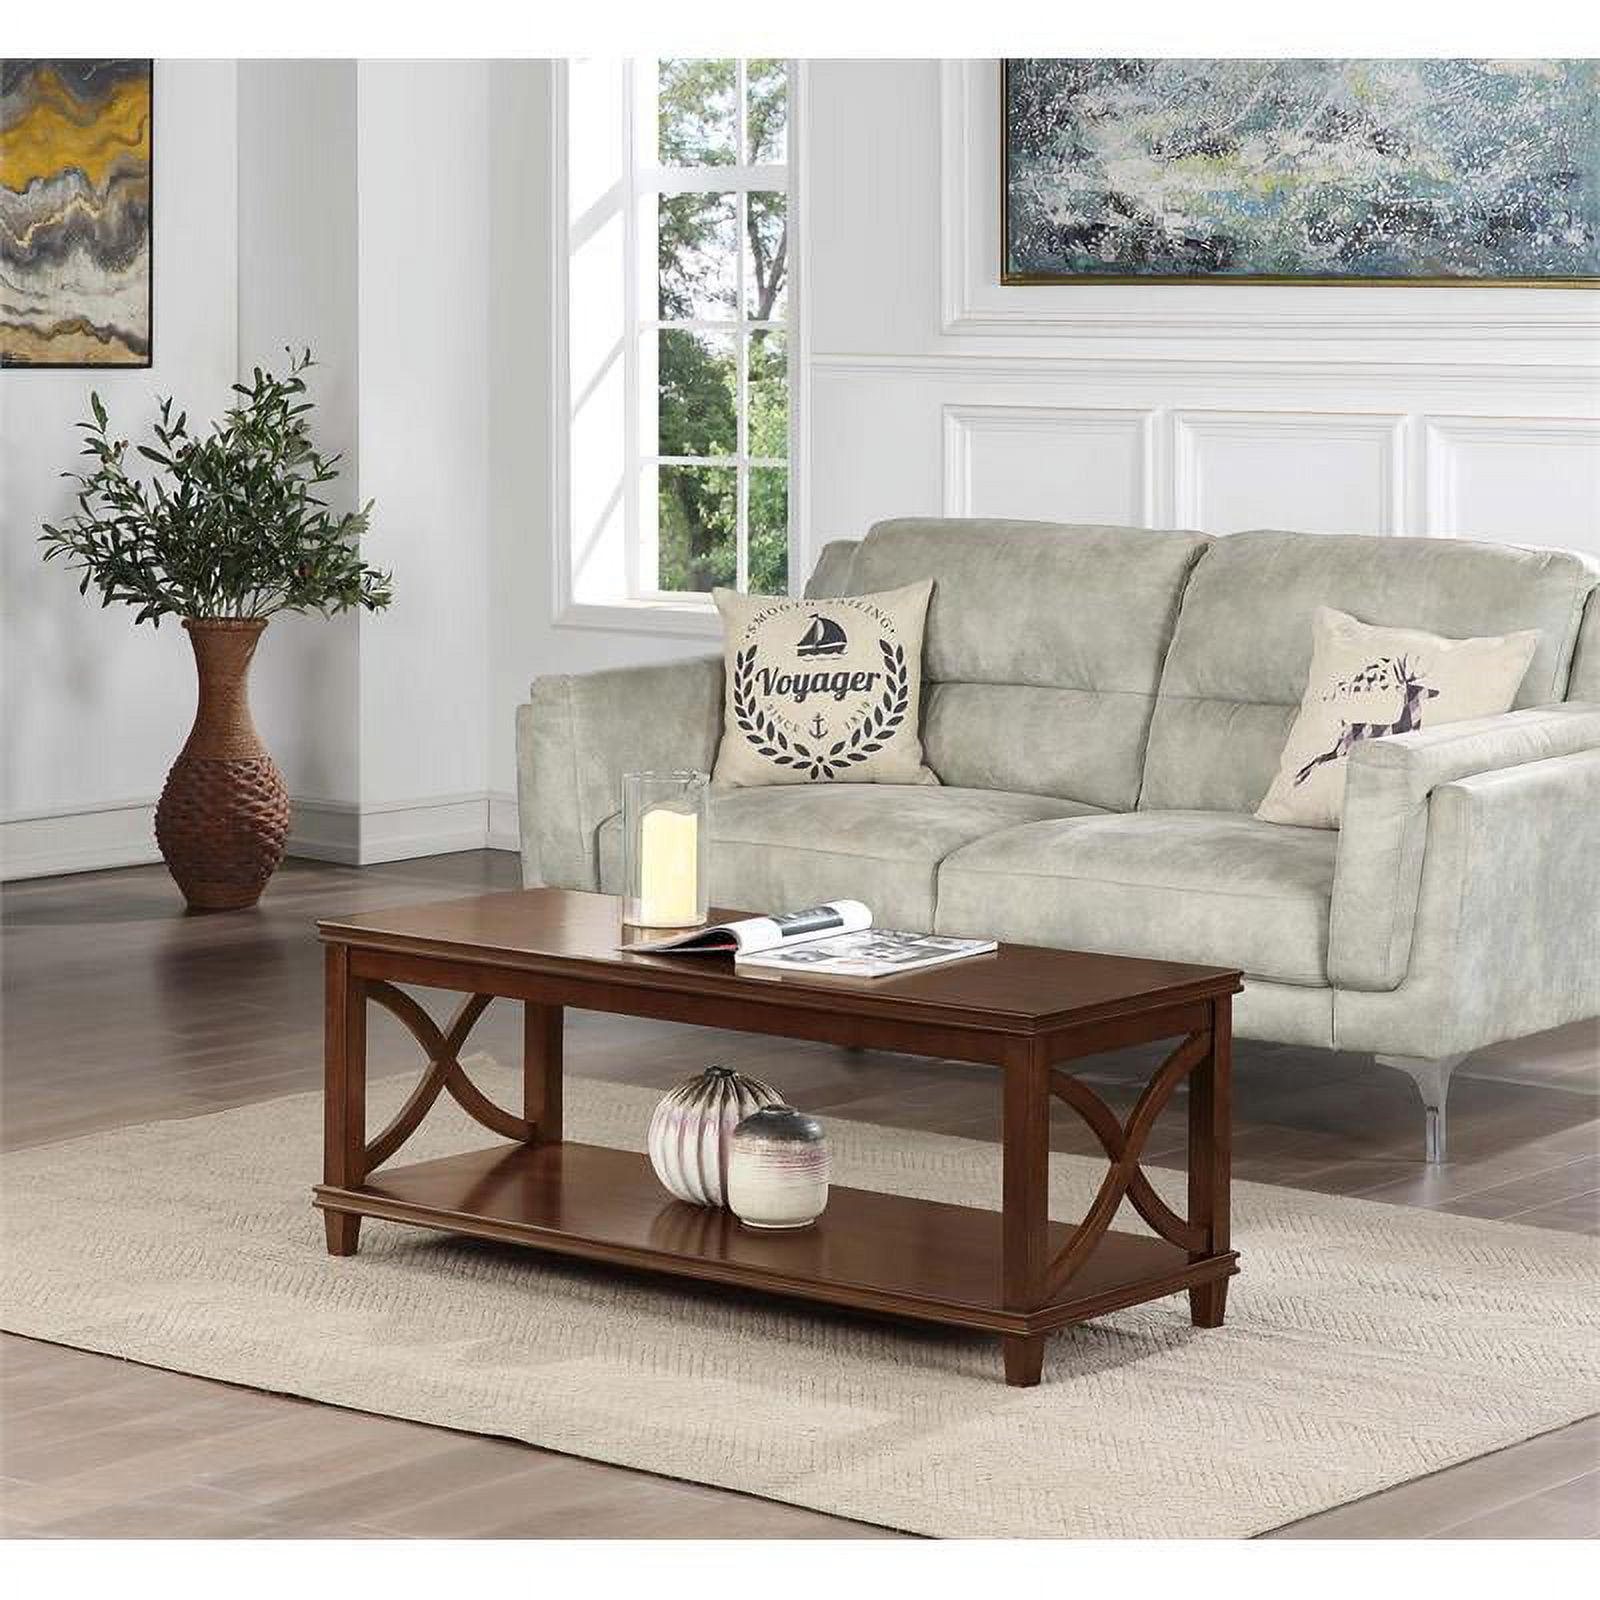 Pemberly Row Coffee Table In Espresso Wood Finish – Walmart Throughout Espresso Wood Finish Coffee Tables (Photo 1 of 15)